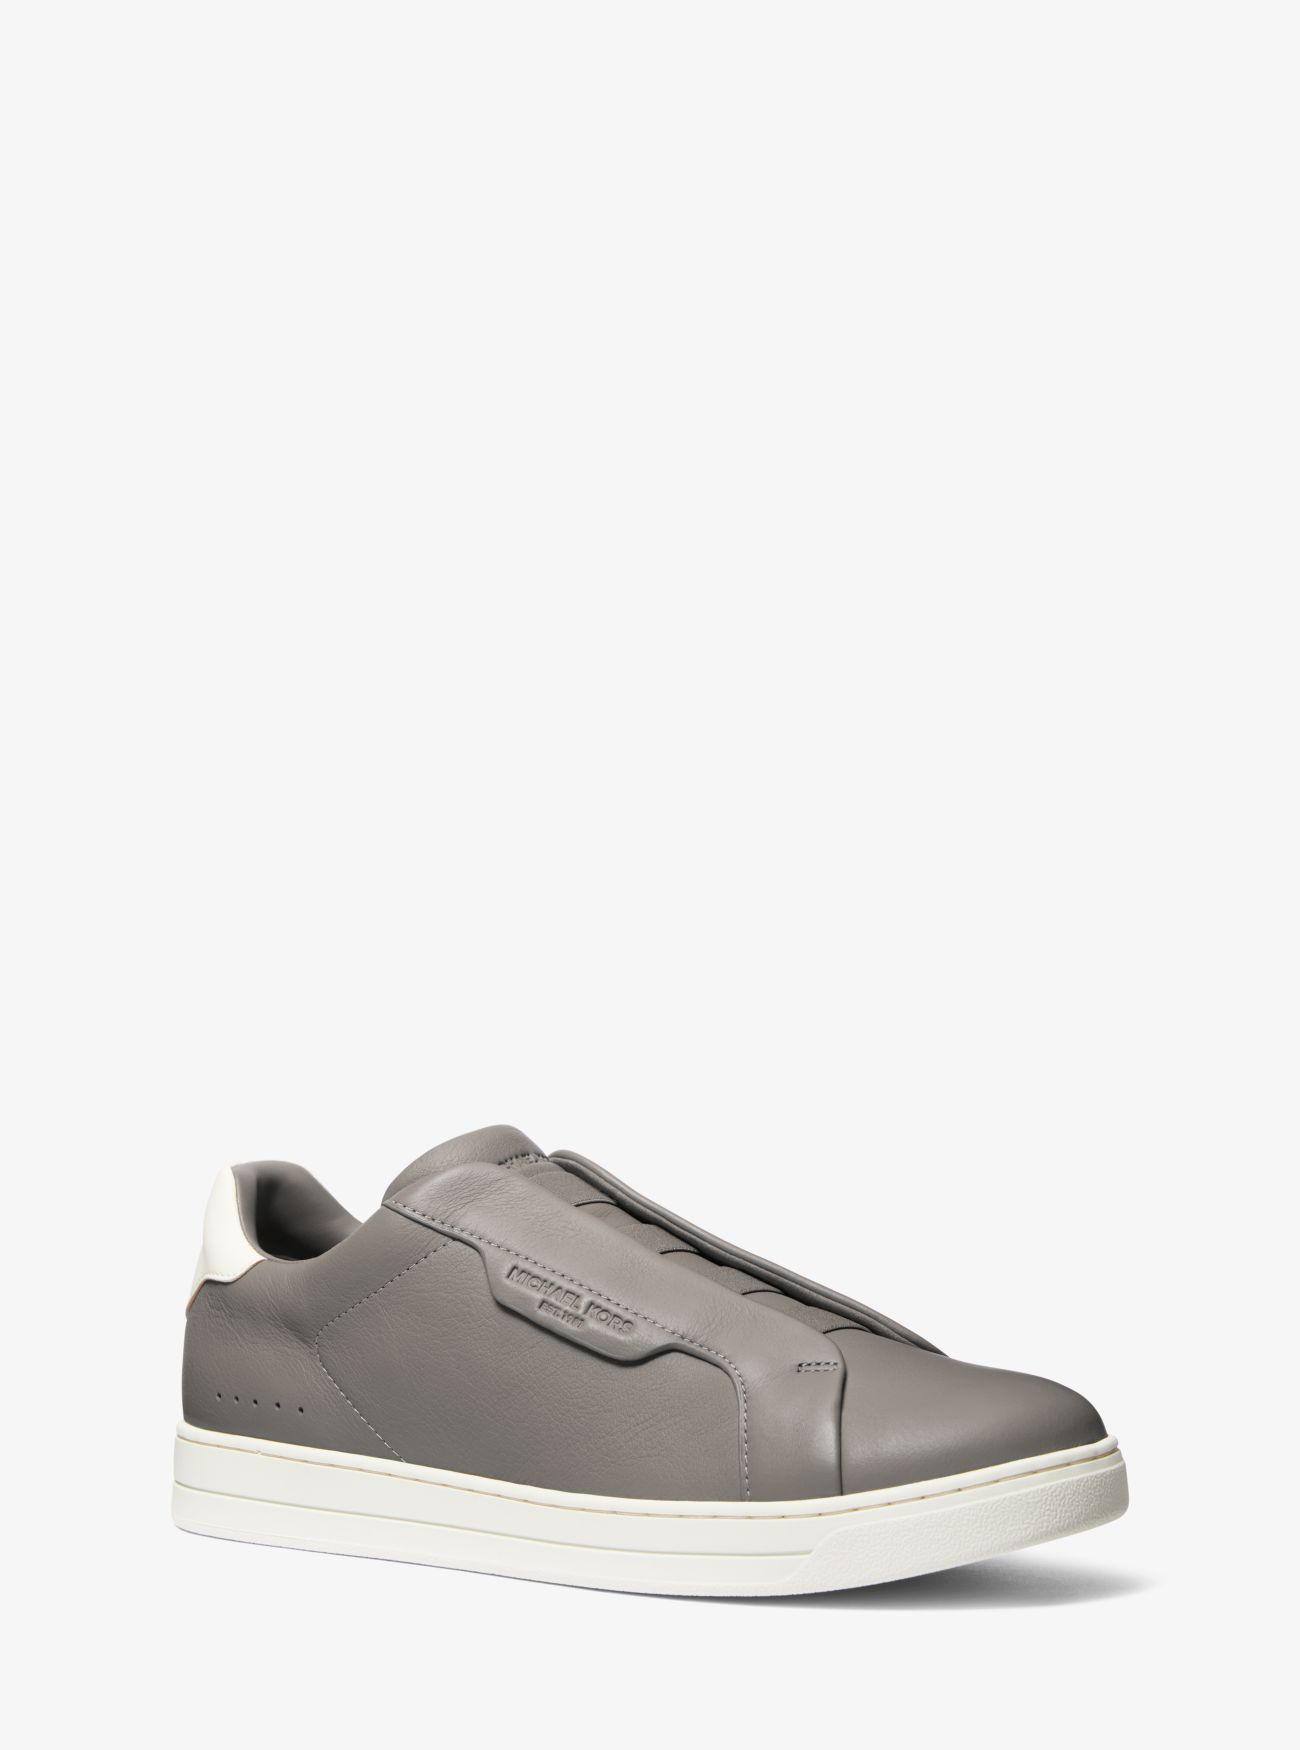 MK Keating Two-Tone Leather Slip-On Trainers - Heather Grey - Michael Kors